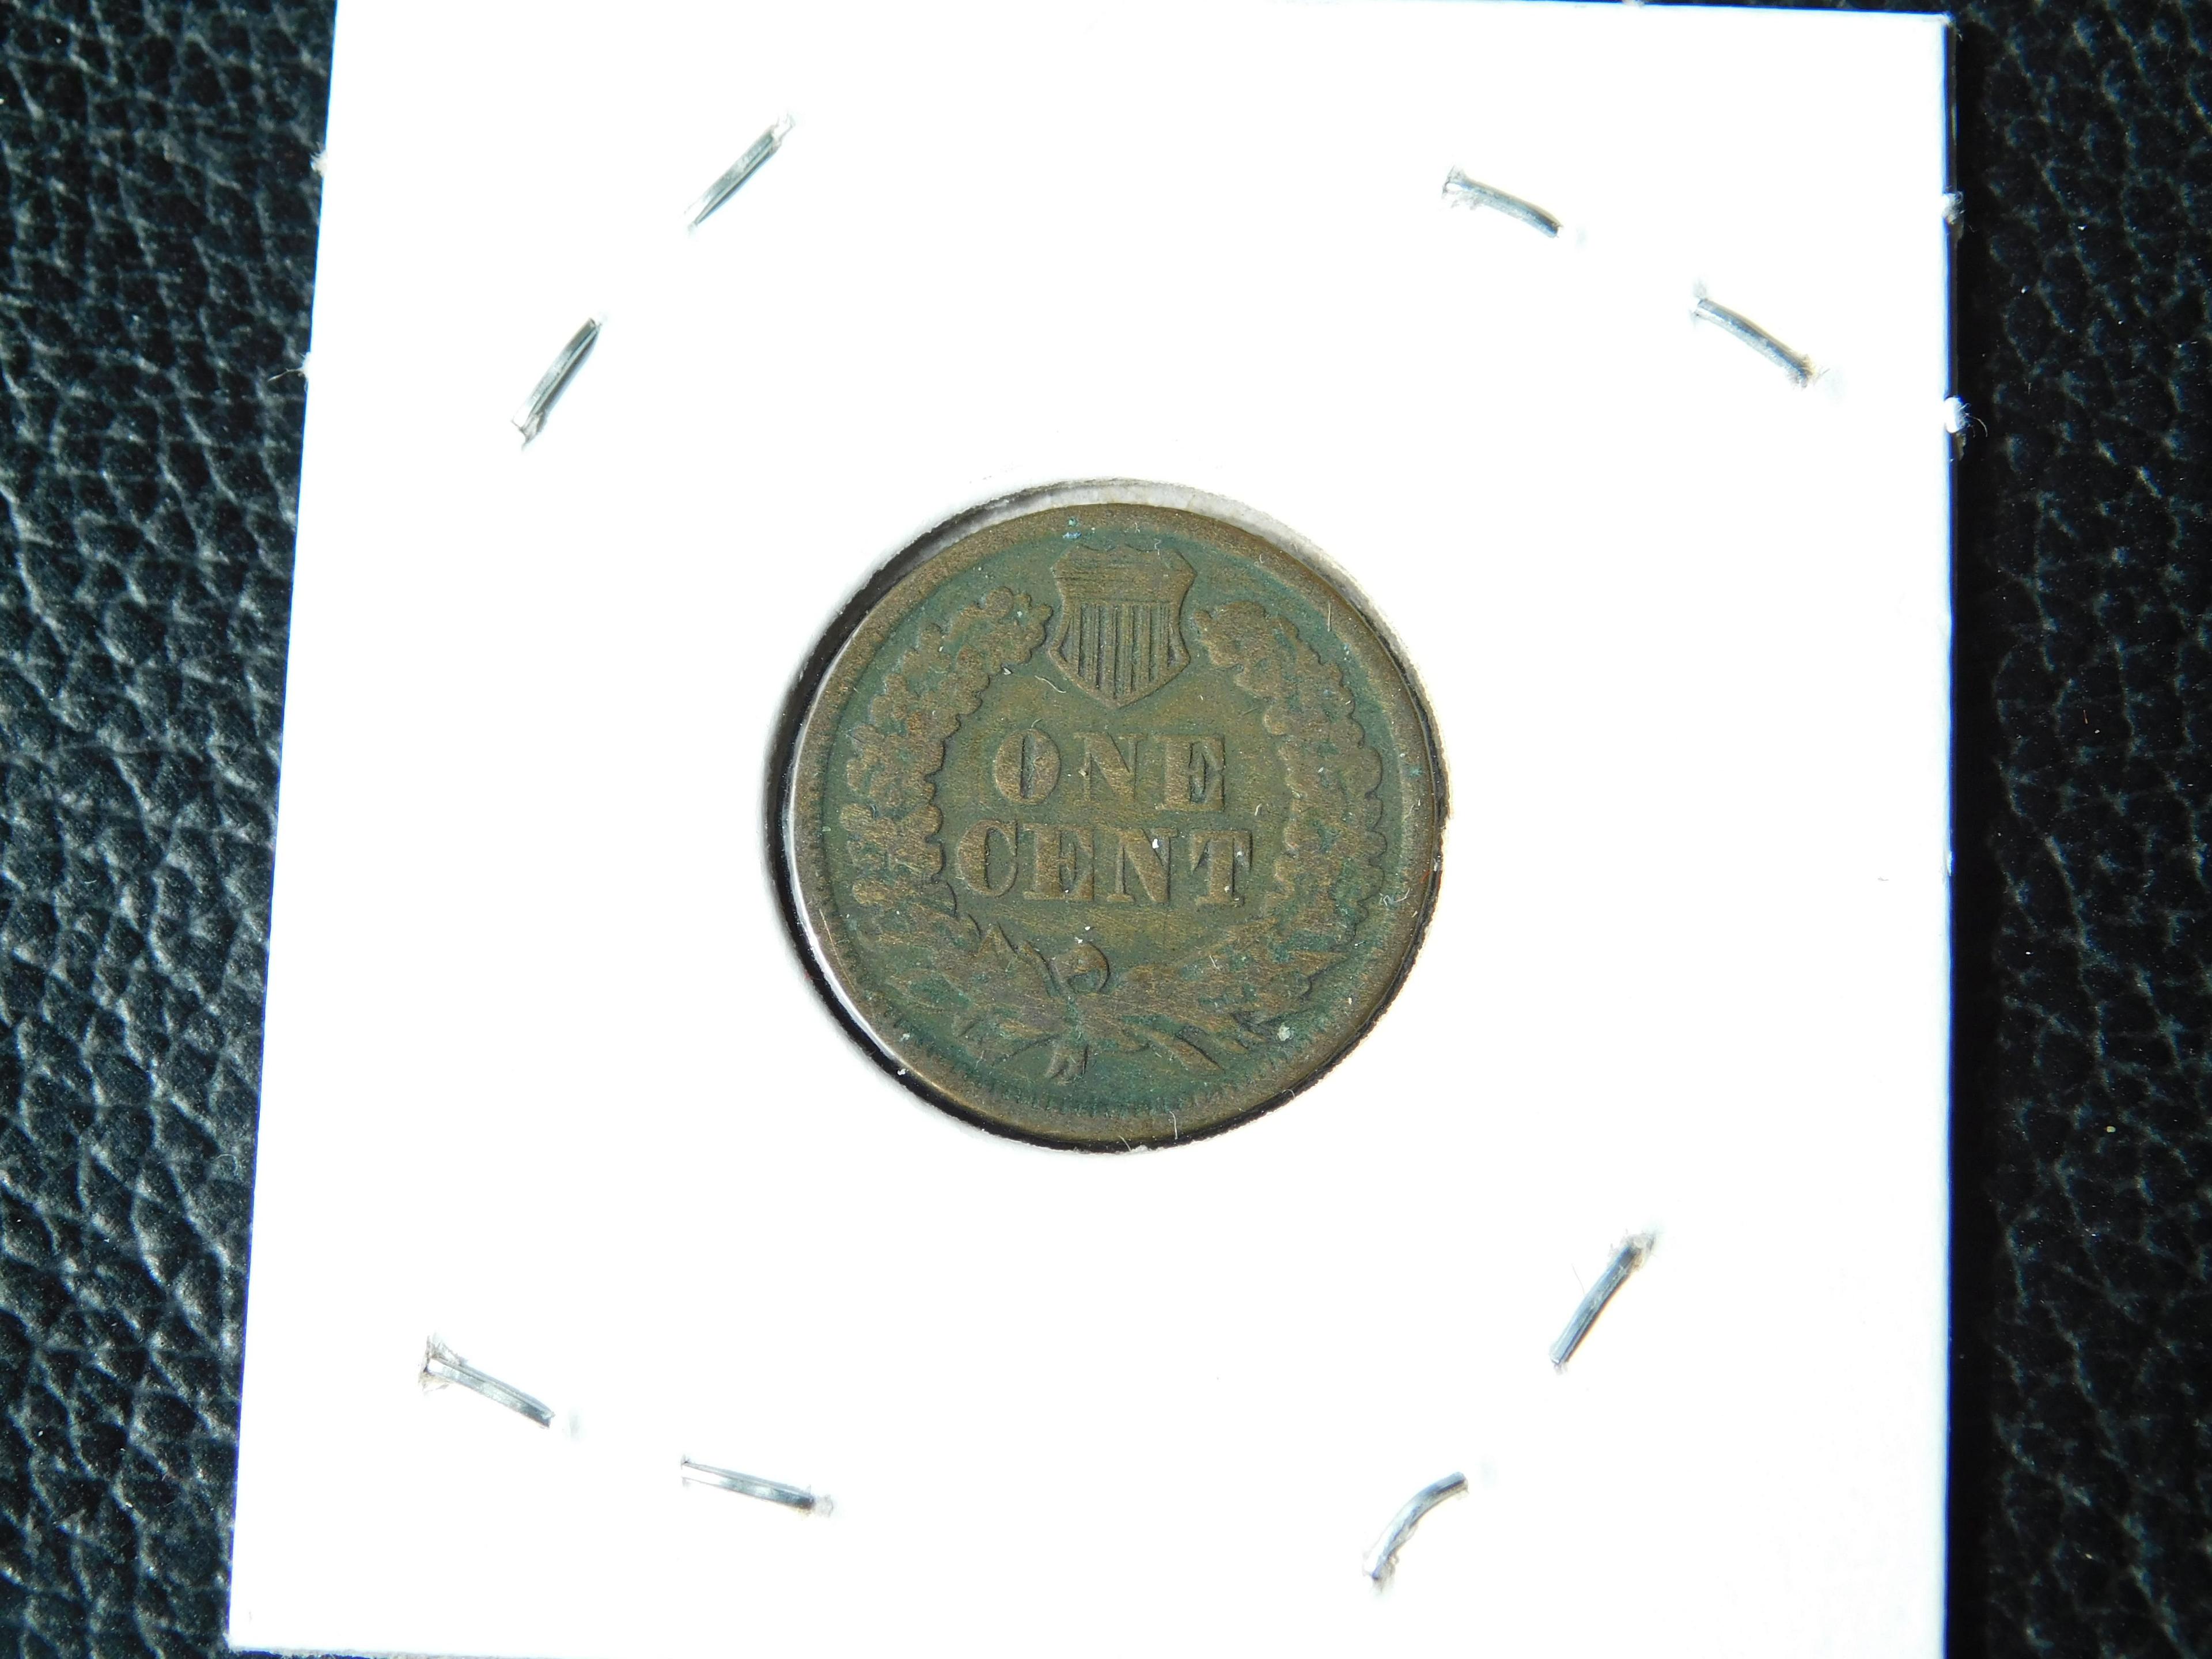 1865 INDIAN HEAD CENT G